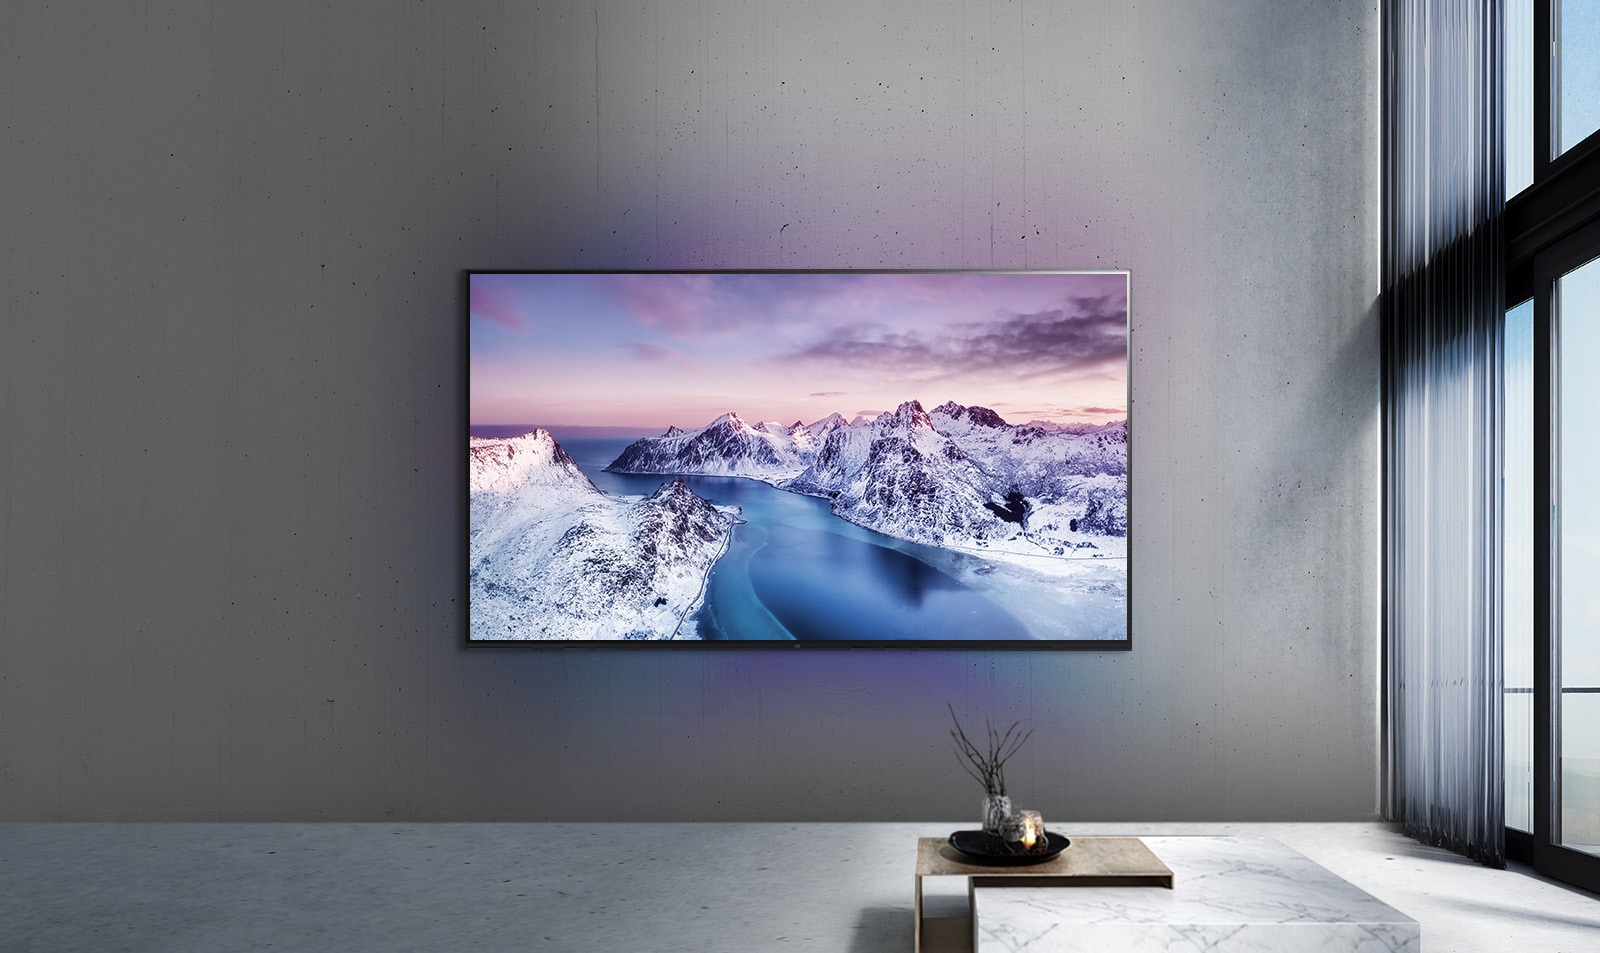 A wall-mounted UHD TV with a Zen-style table in front of it.